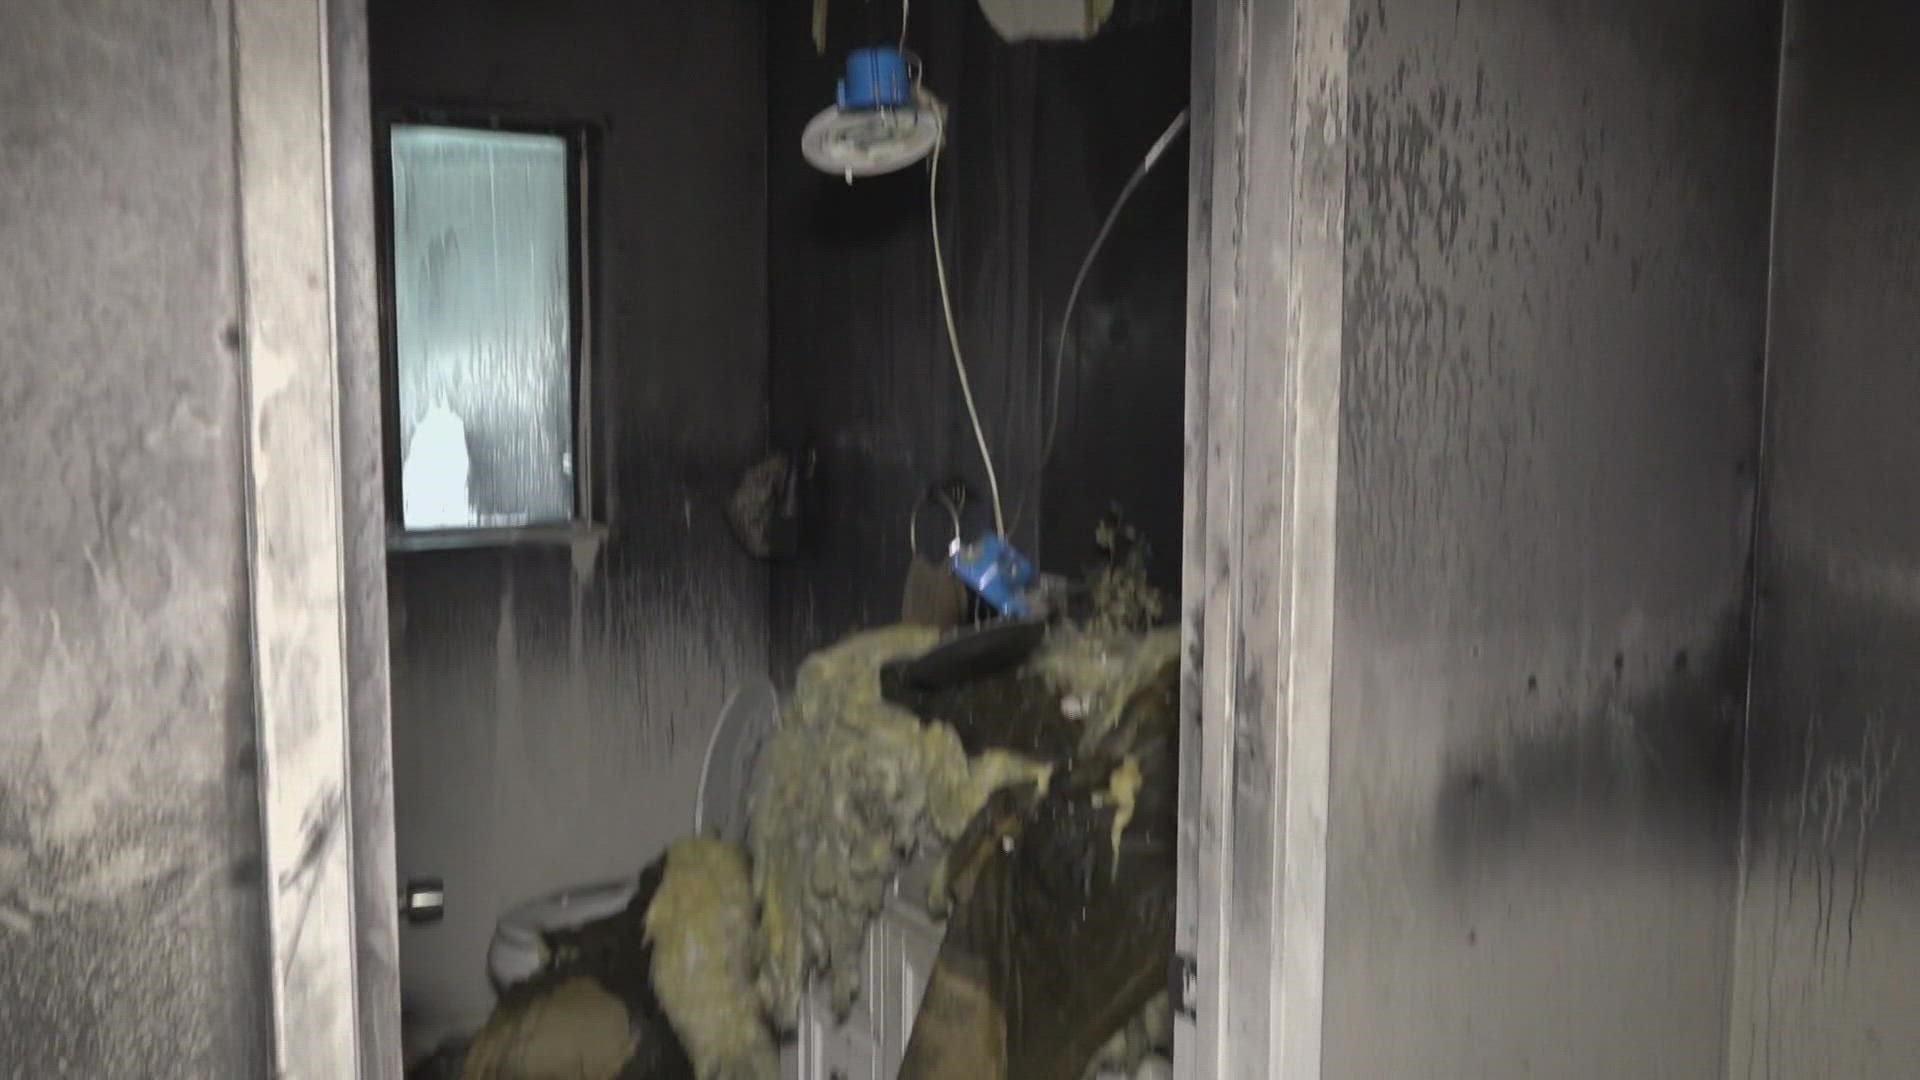 The fire broke out on December 29th. The family believes it was an electrical fire.